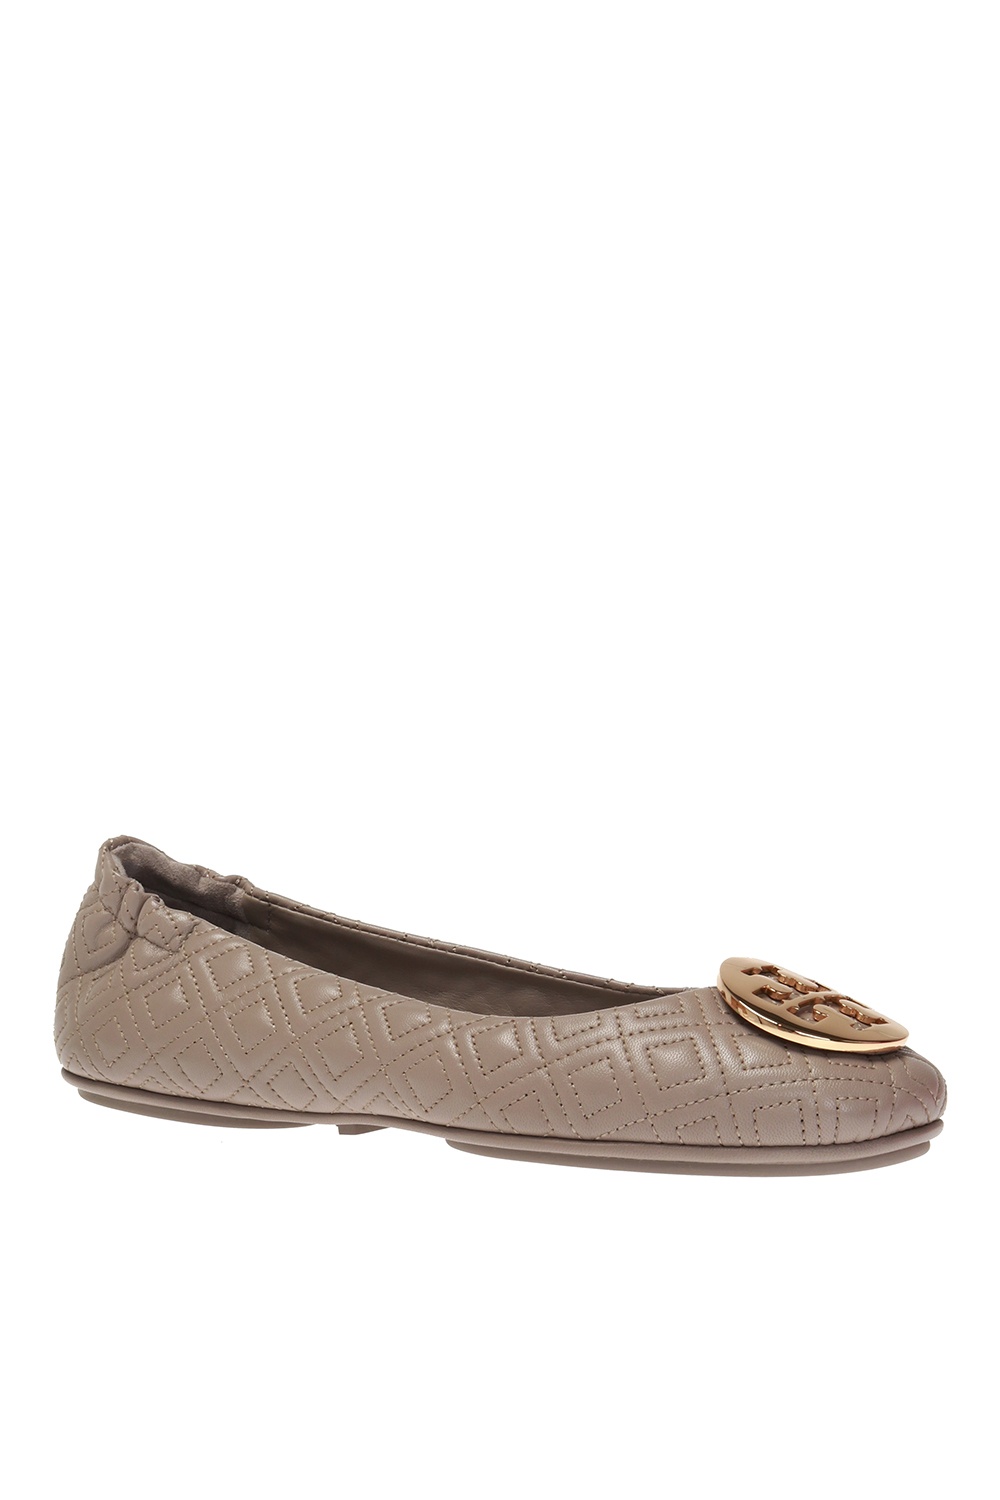 Women's Shoes | Tory Burch Leather ballet flats with logo | IetpShops |  Shoes CALL IT SPRING Daliaa 16184883 001